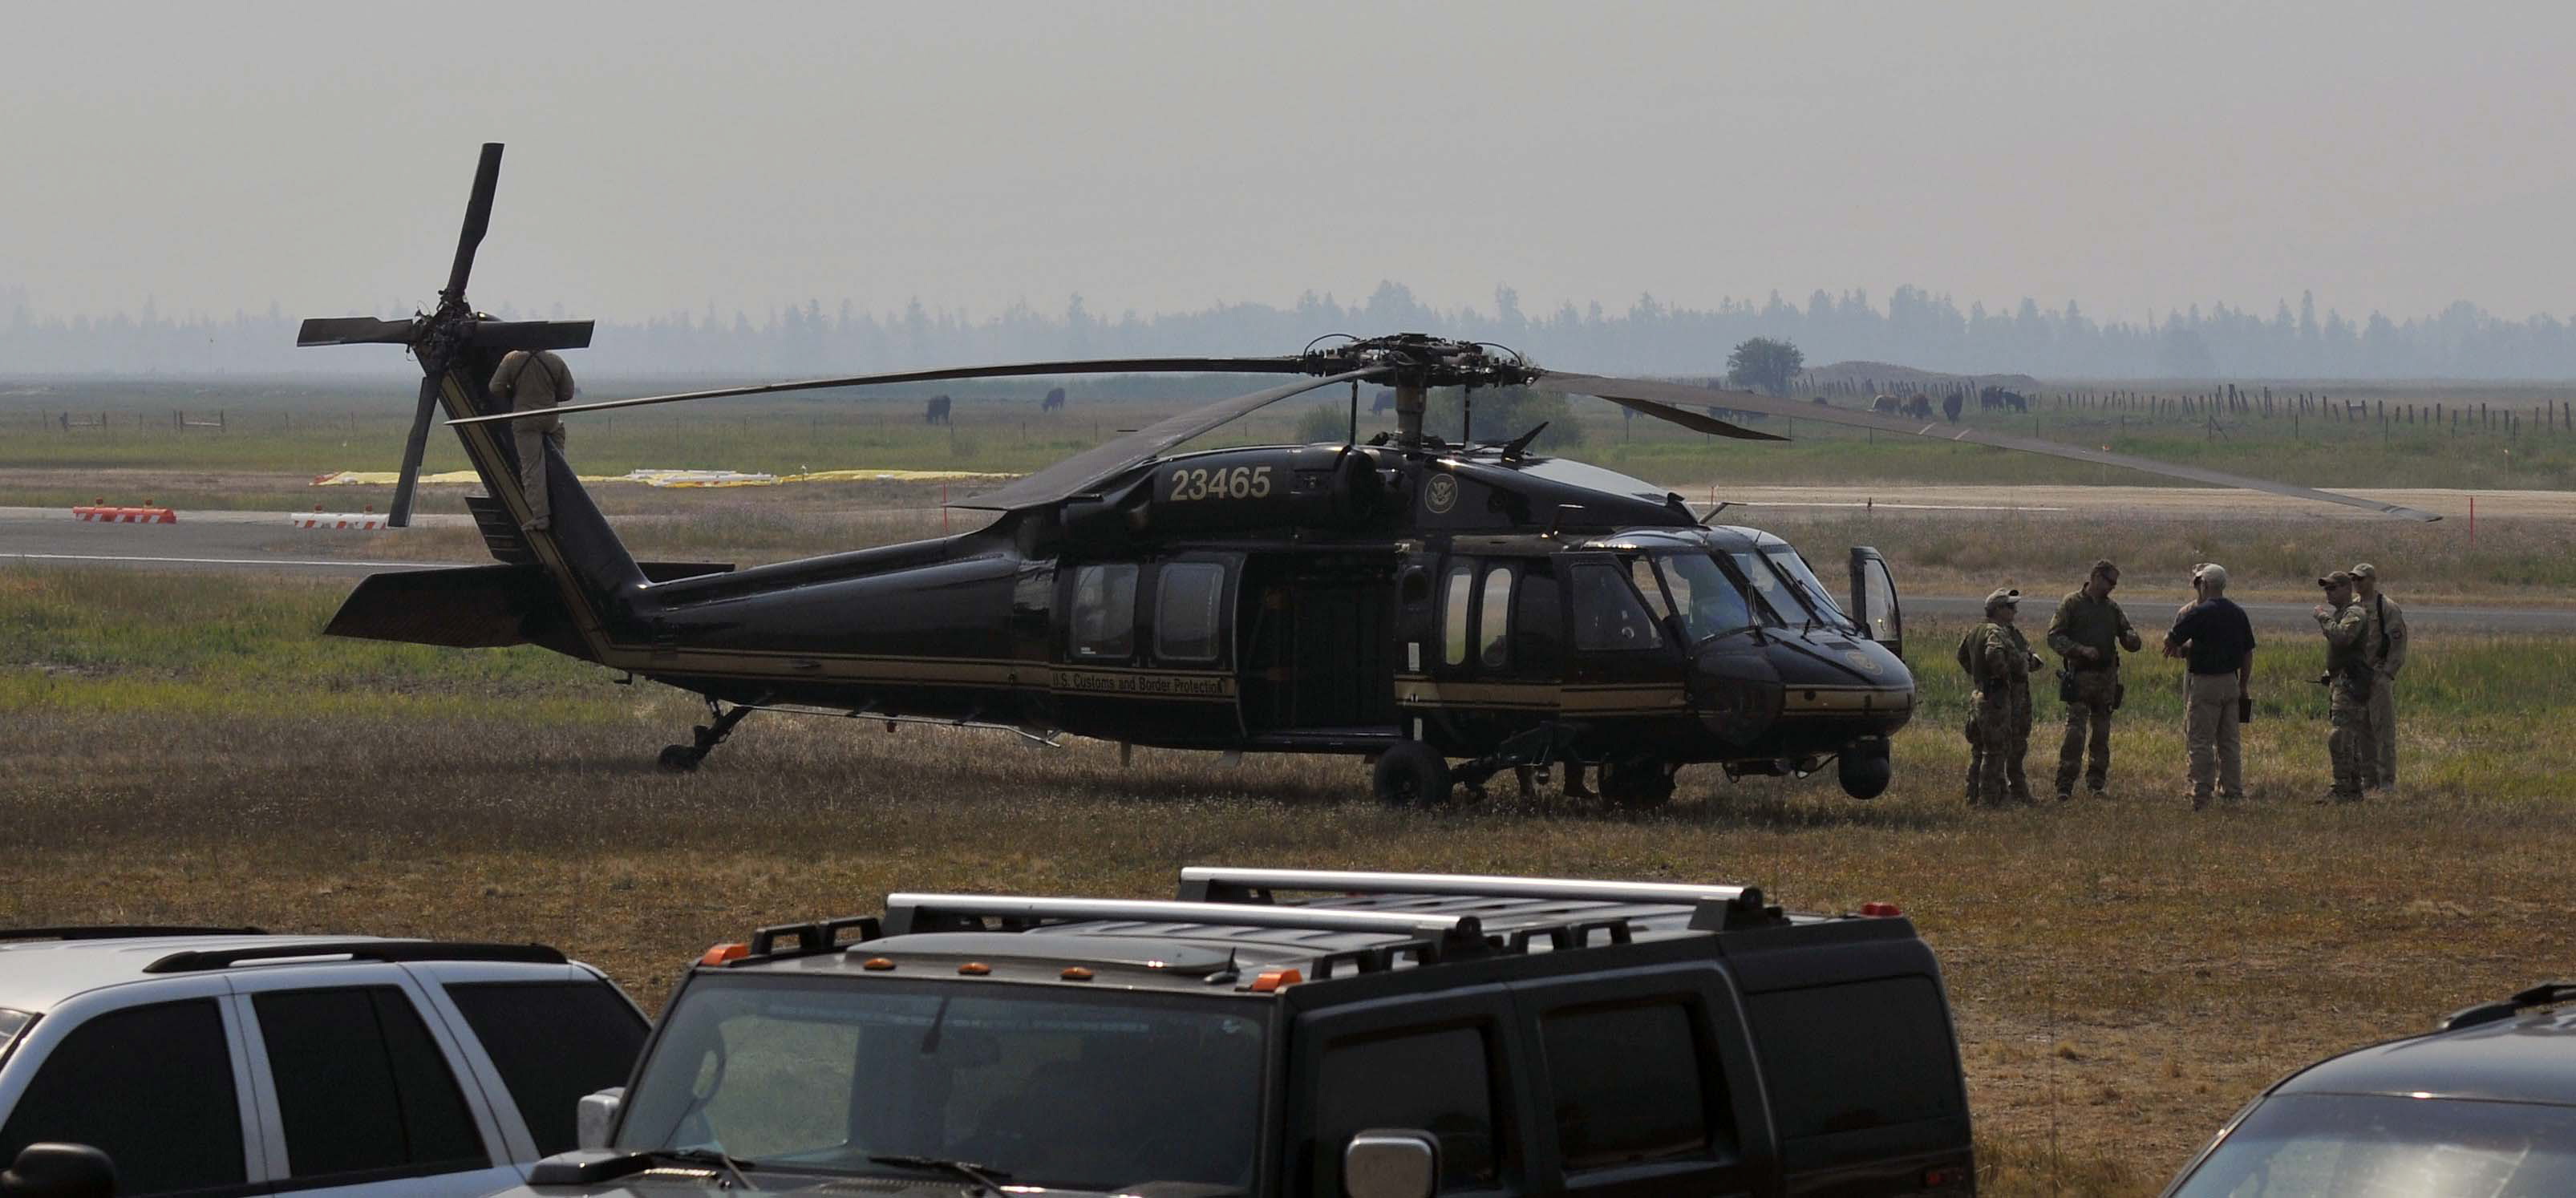 Authorities wait near a blackhawk helicopter at the Cascade Airport in Cascade, Idaho on Saturday. 40-year-old James Lee DiMaggio was suspected of kidnapping 16-year-old Hannah Anderson.